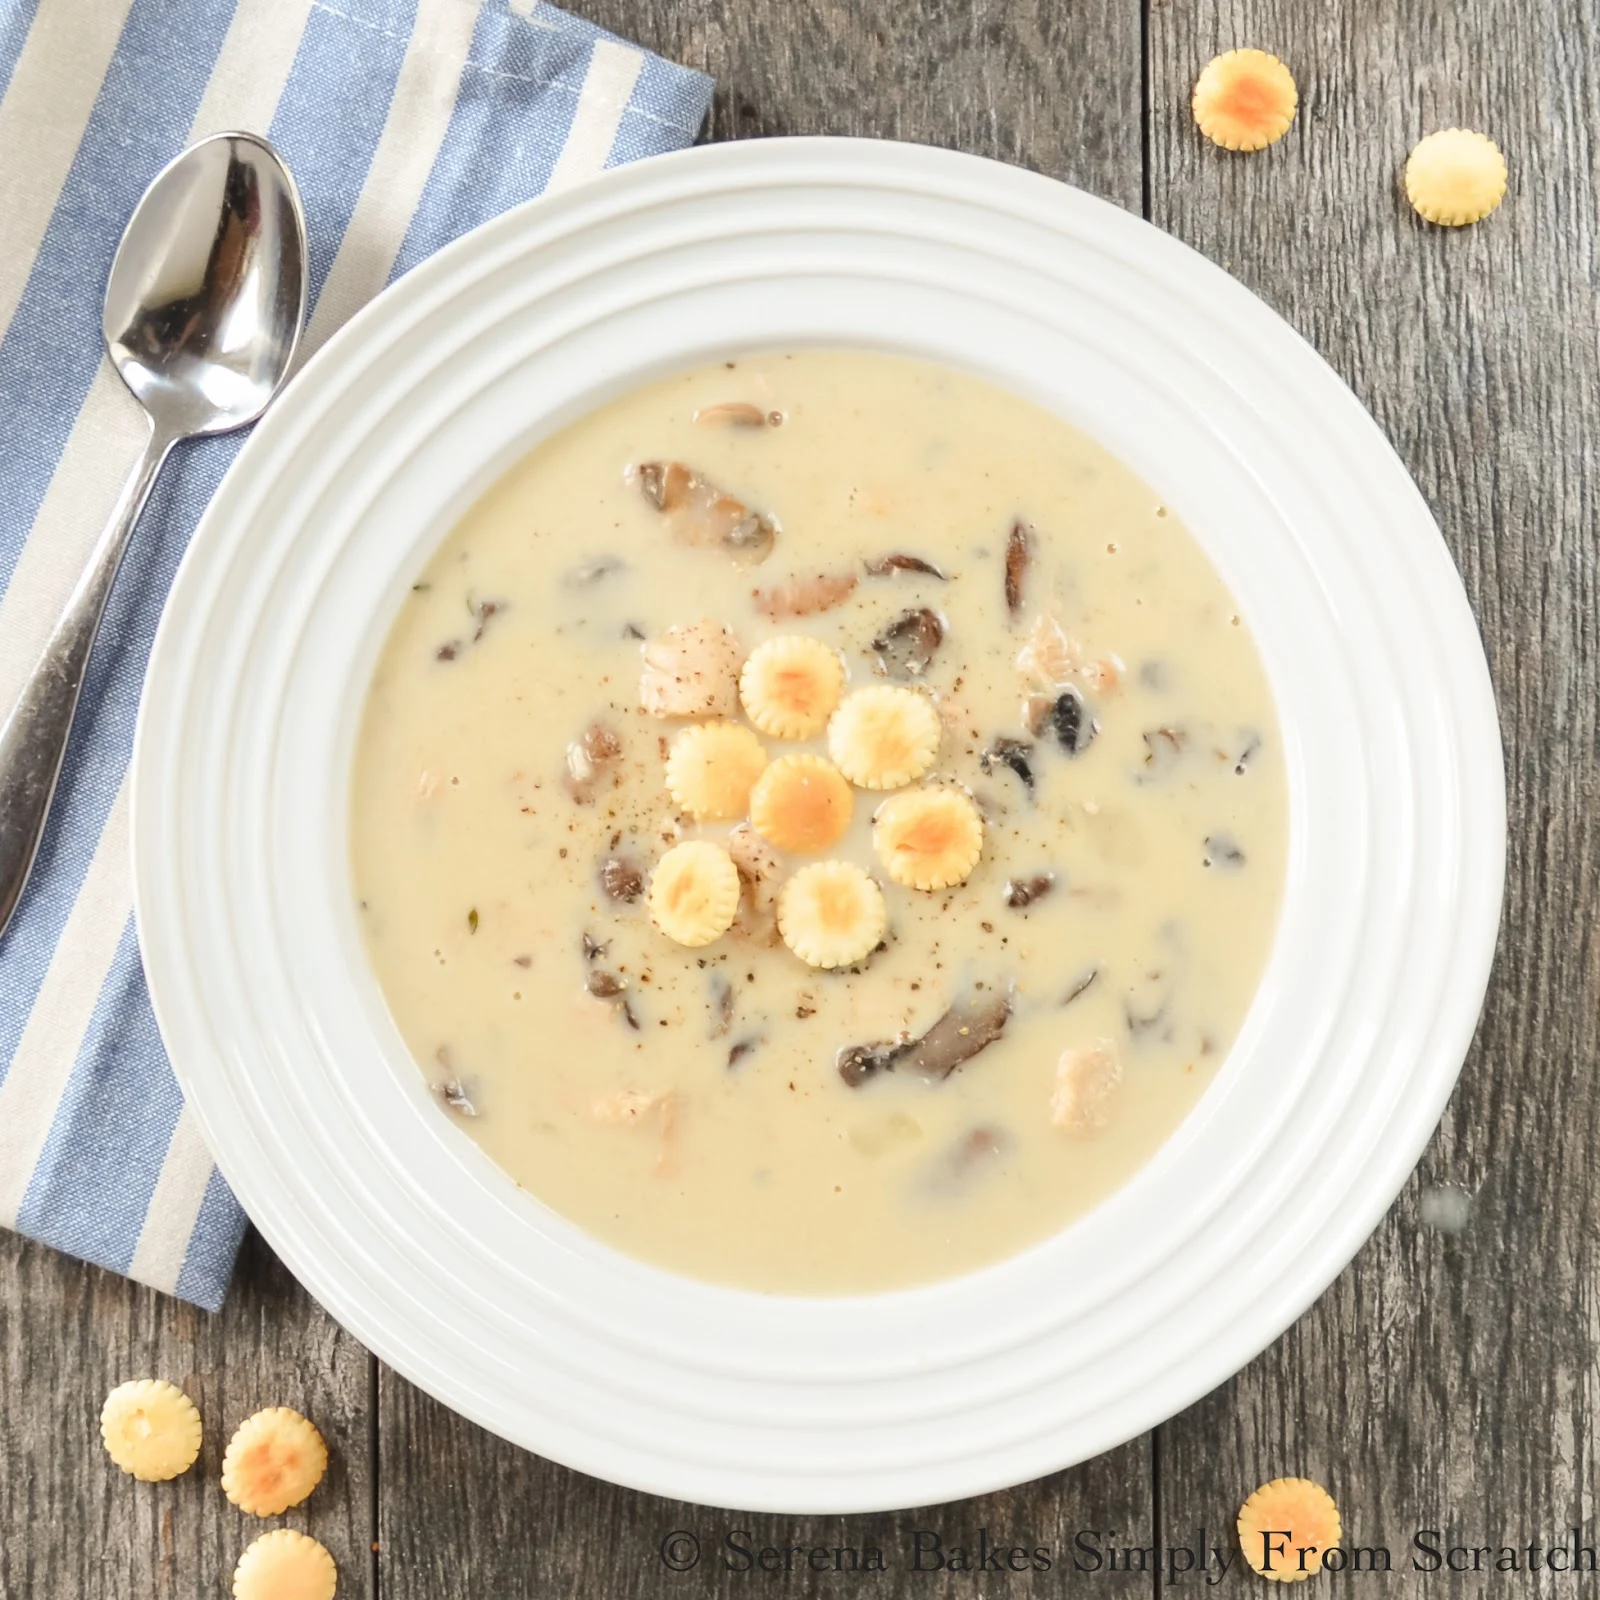 Creamy Chicken and Mushroom Soup the perfect comfort food on a cold day! 